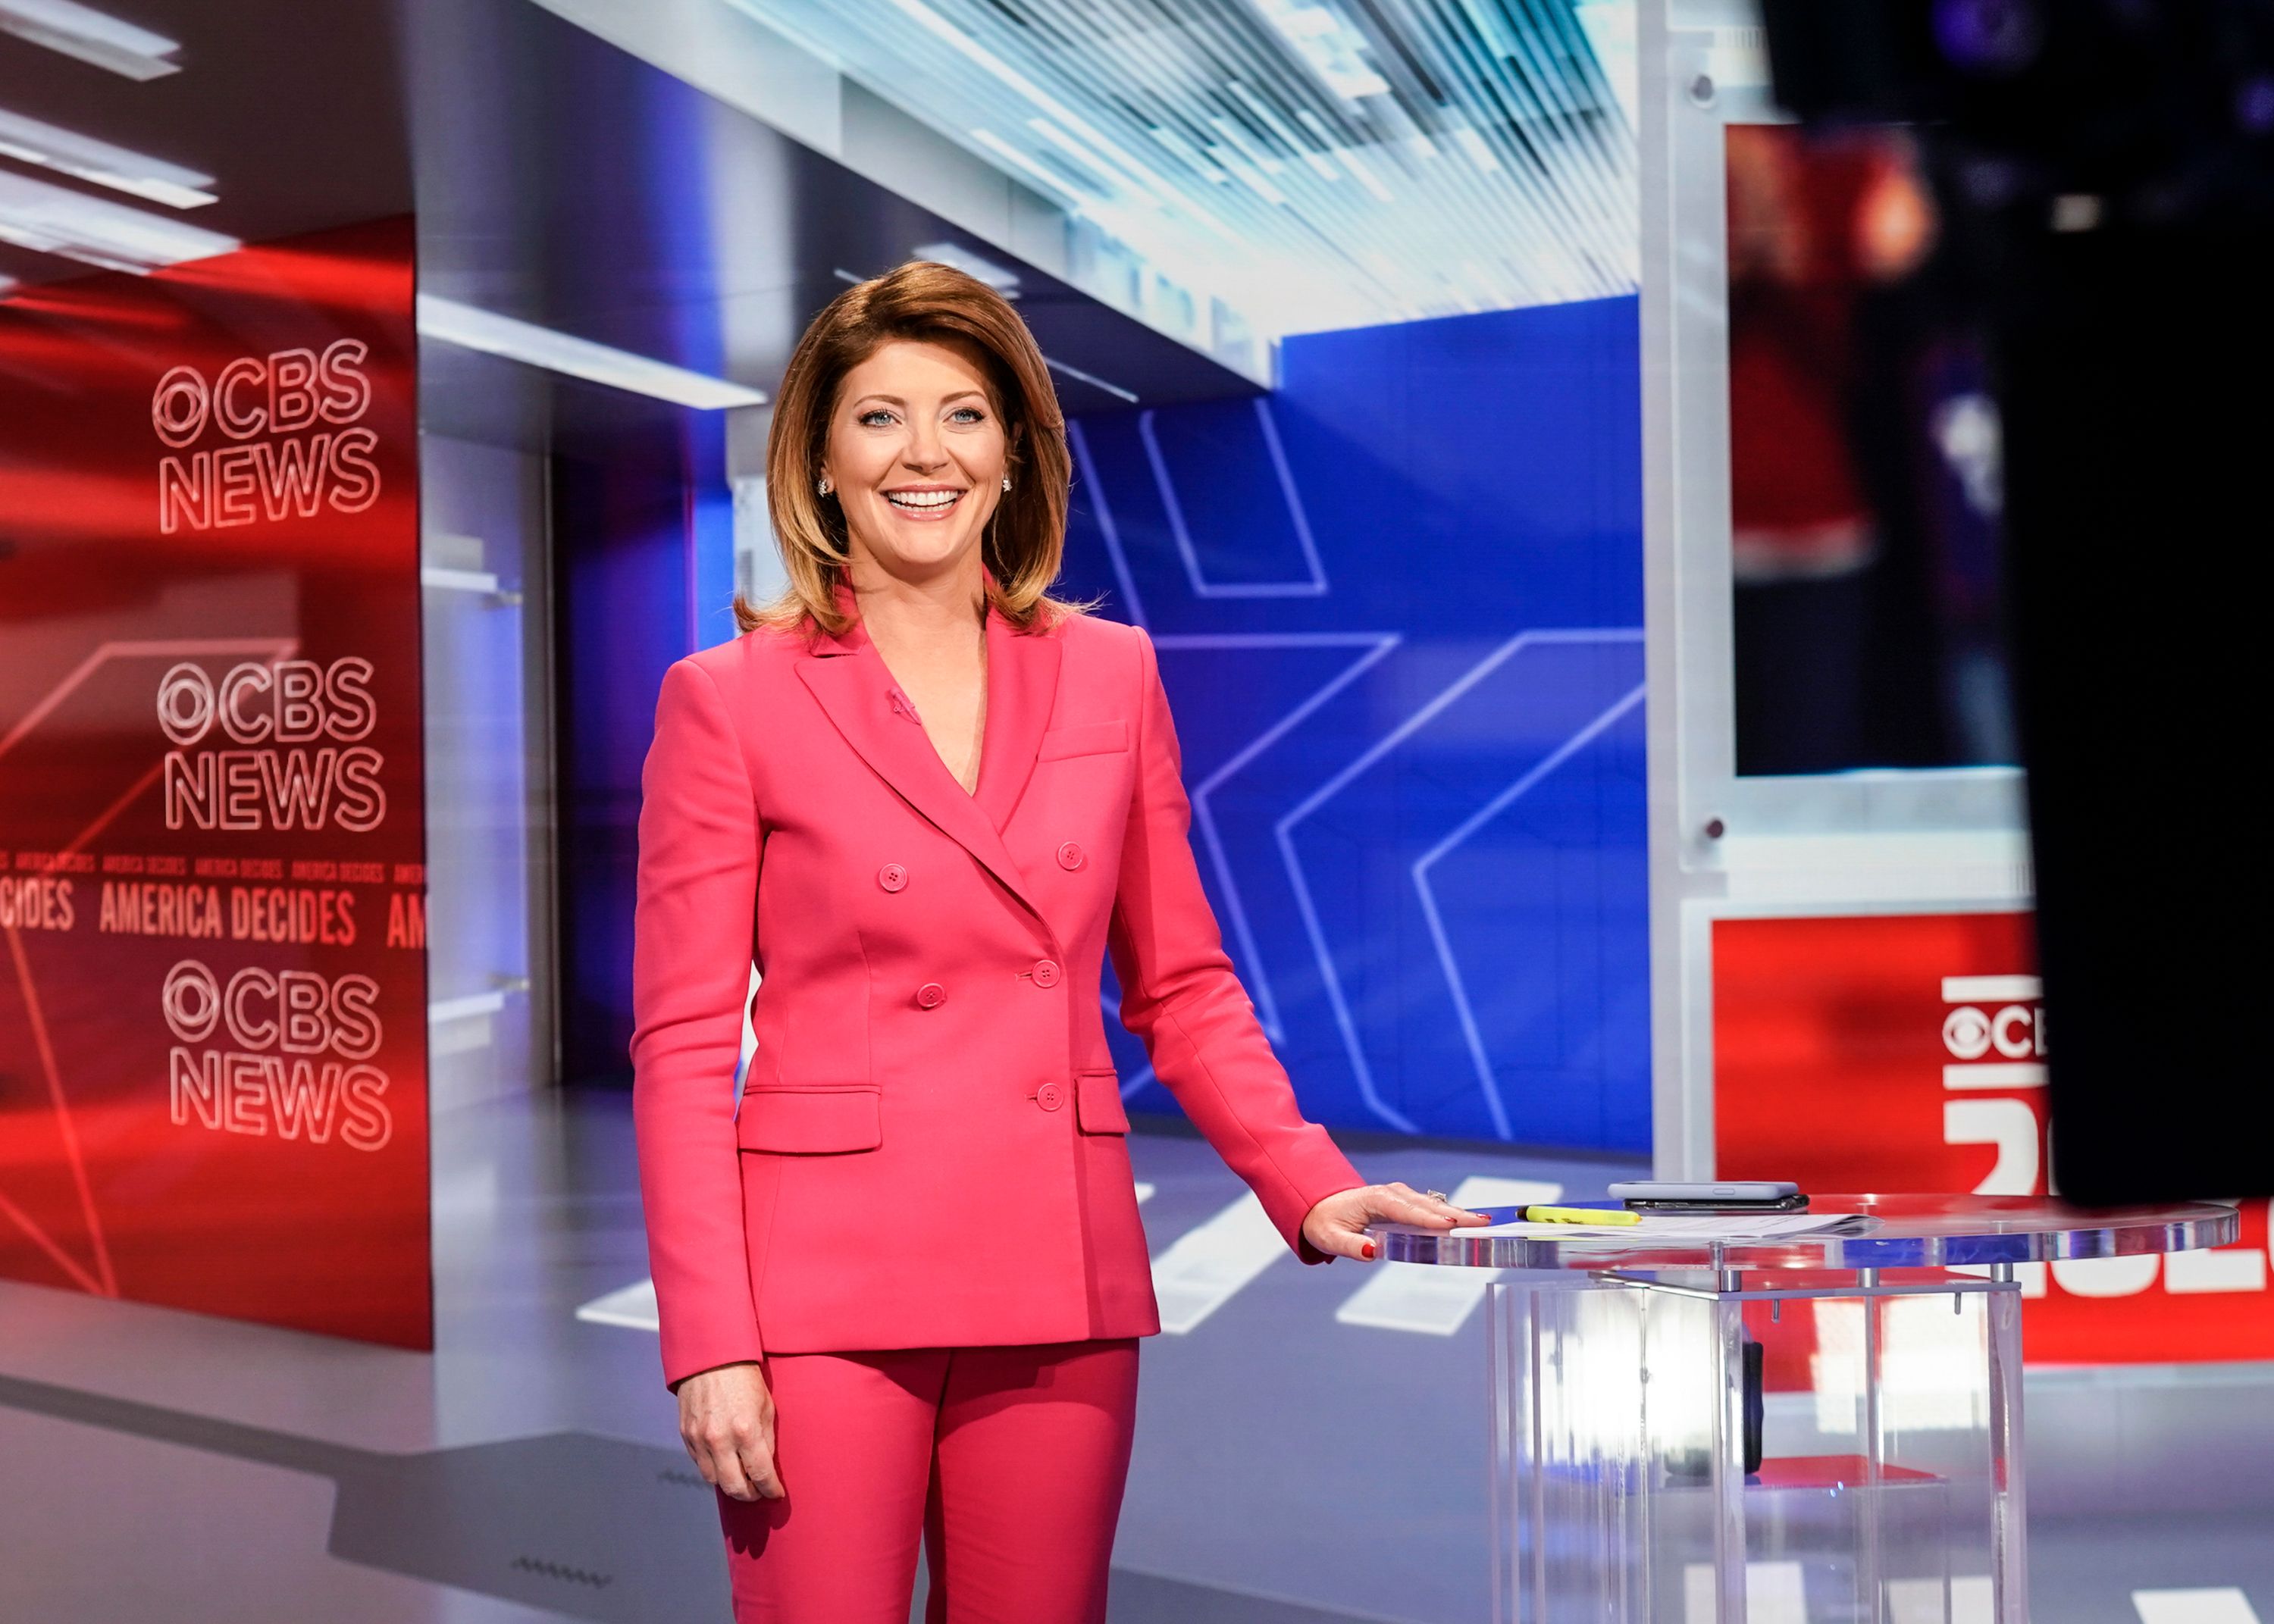 Norah O'Donnell broadcasts Live from CBS Bureau in Washington DC on August 27, 2020. | Photo: Getty Images